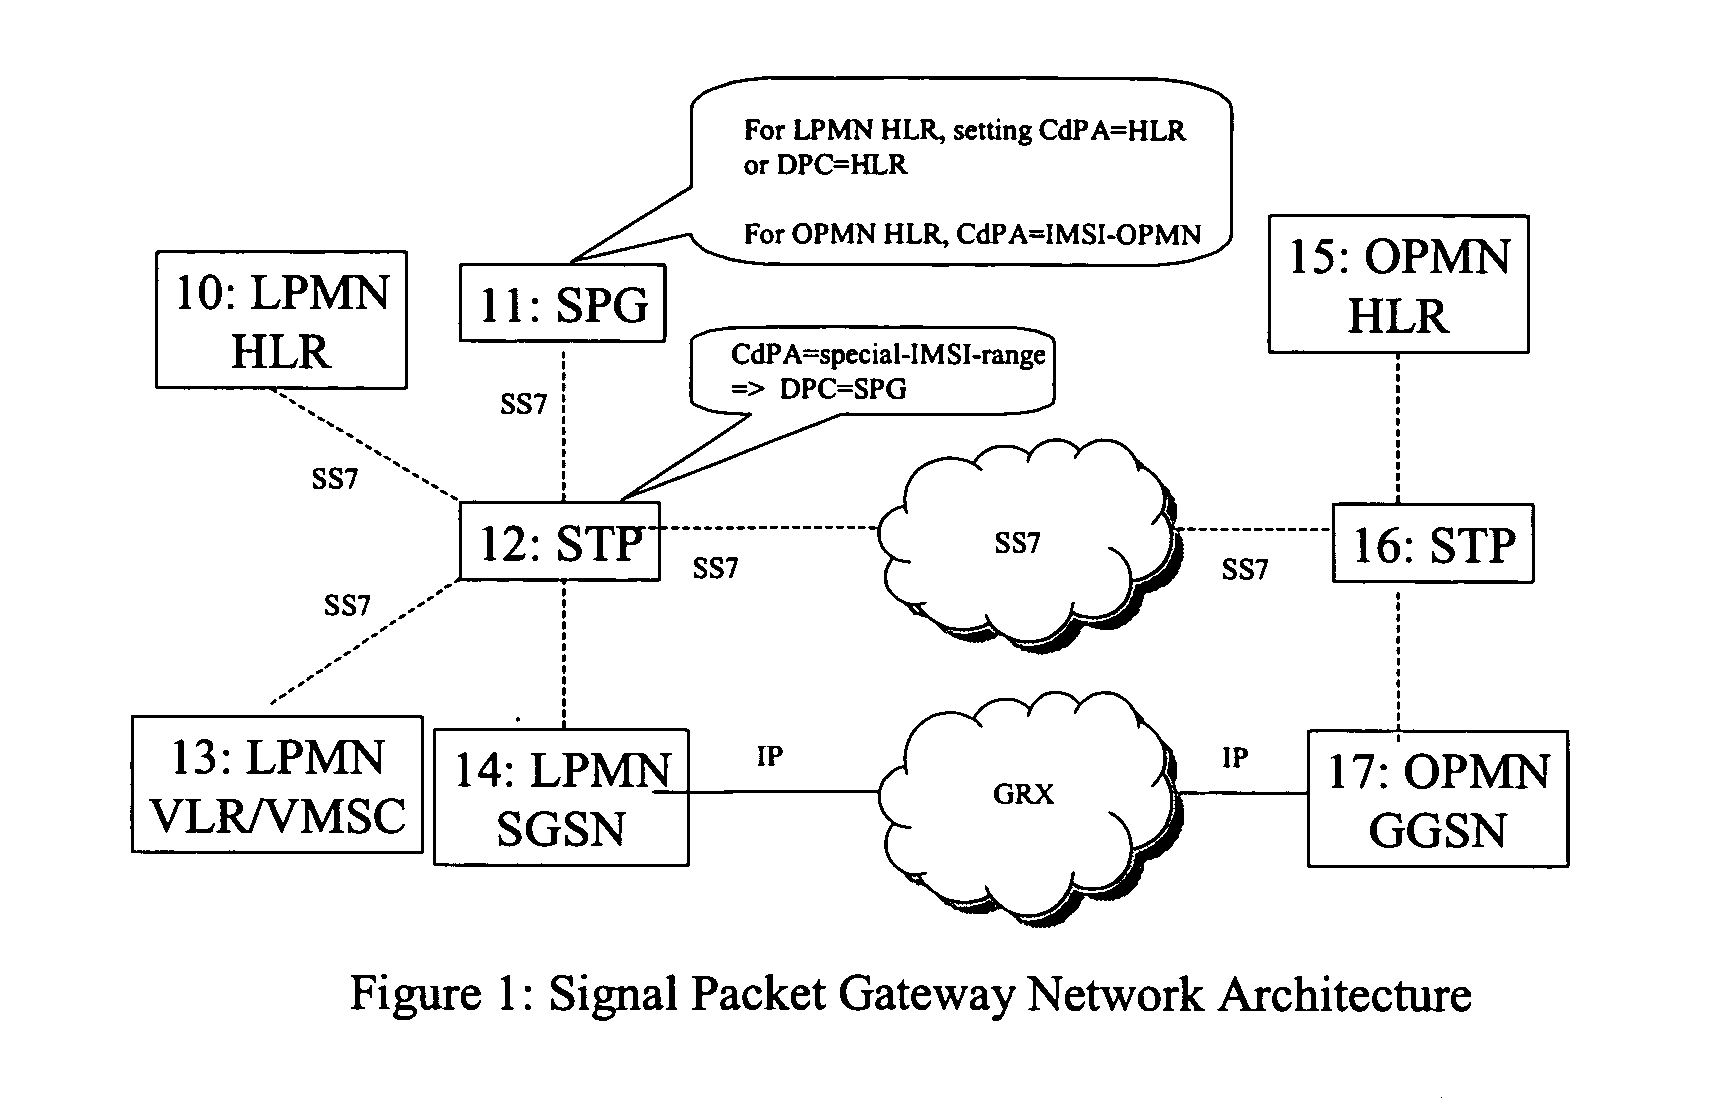 Method and apparatus for subscribers to use a proprietary wireless e-mail and personal information service within a public mobile network not otherwise configured to enable that use